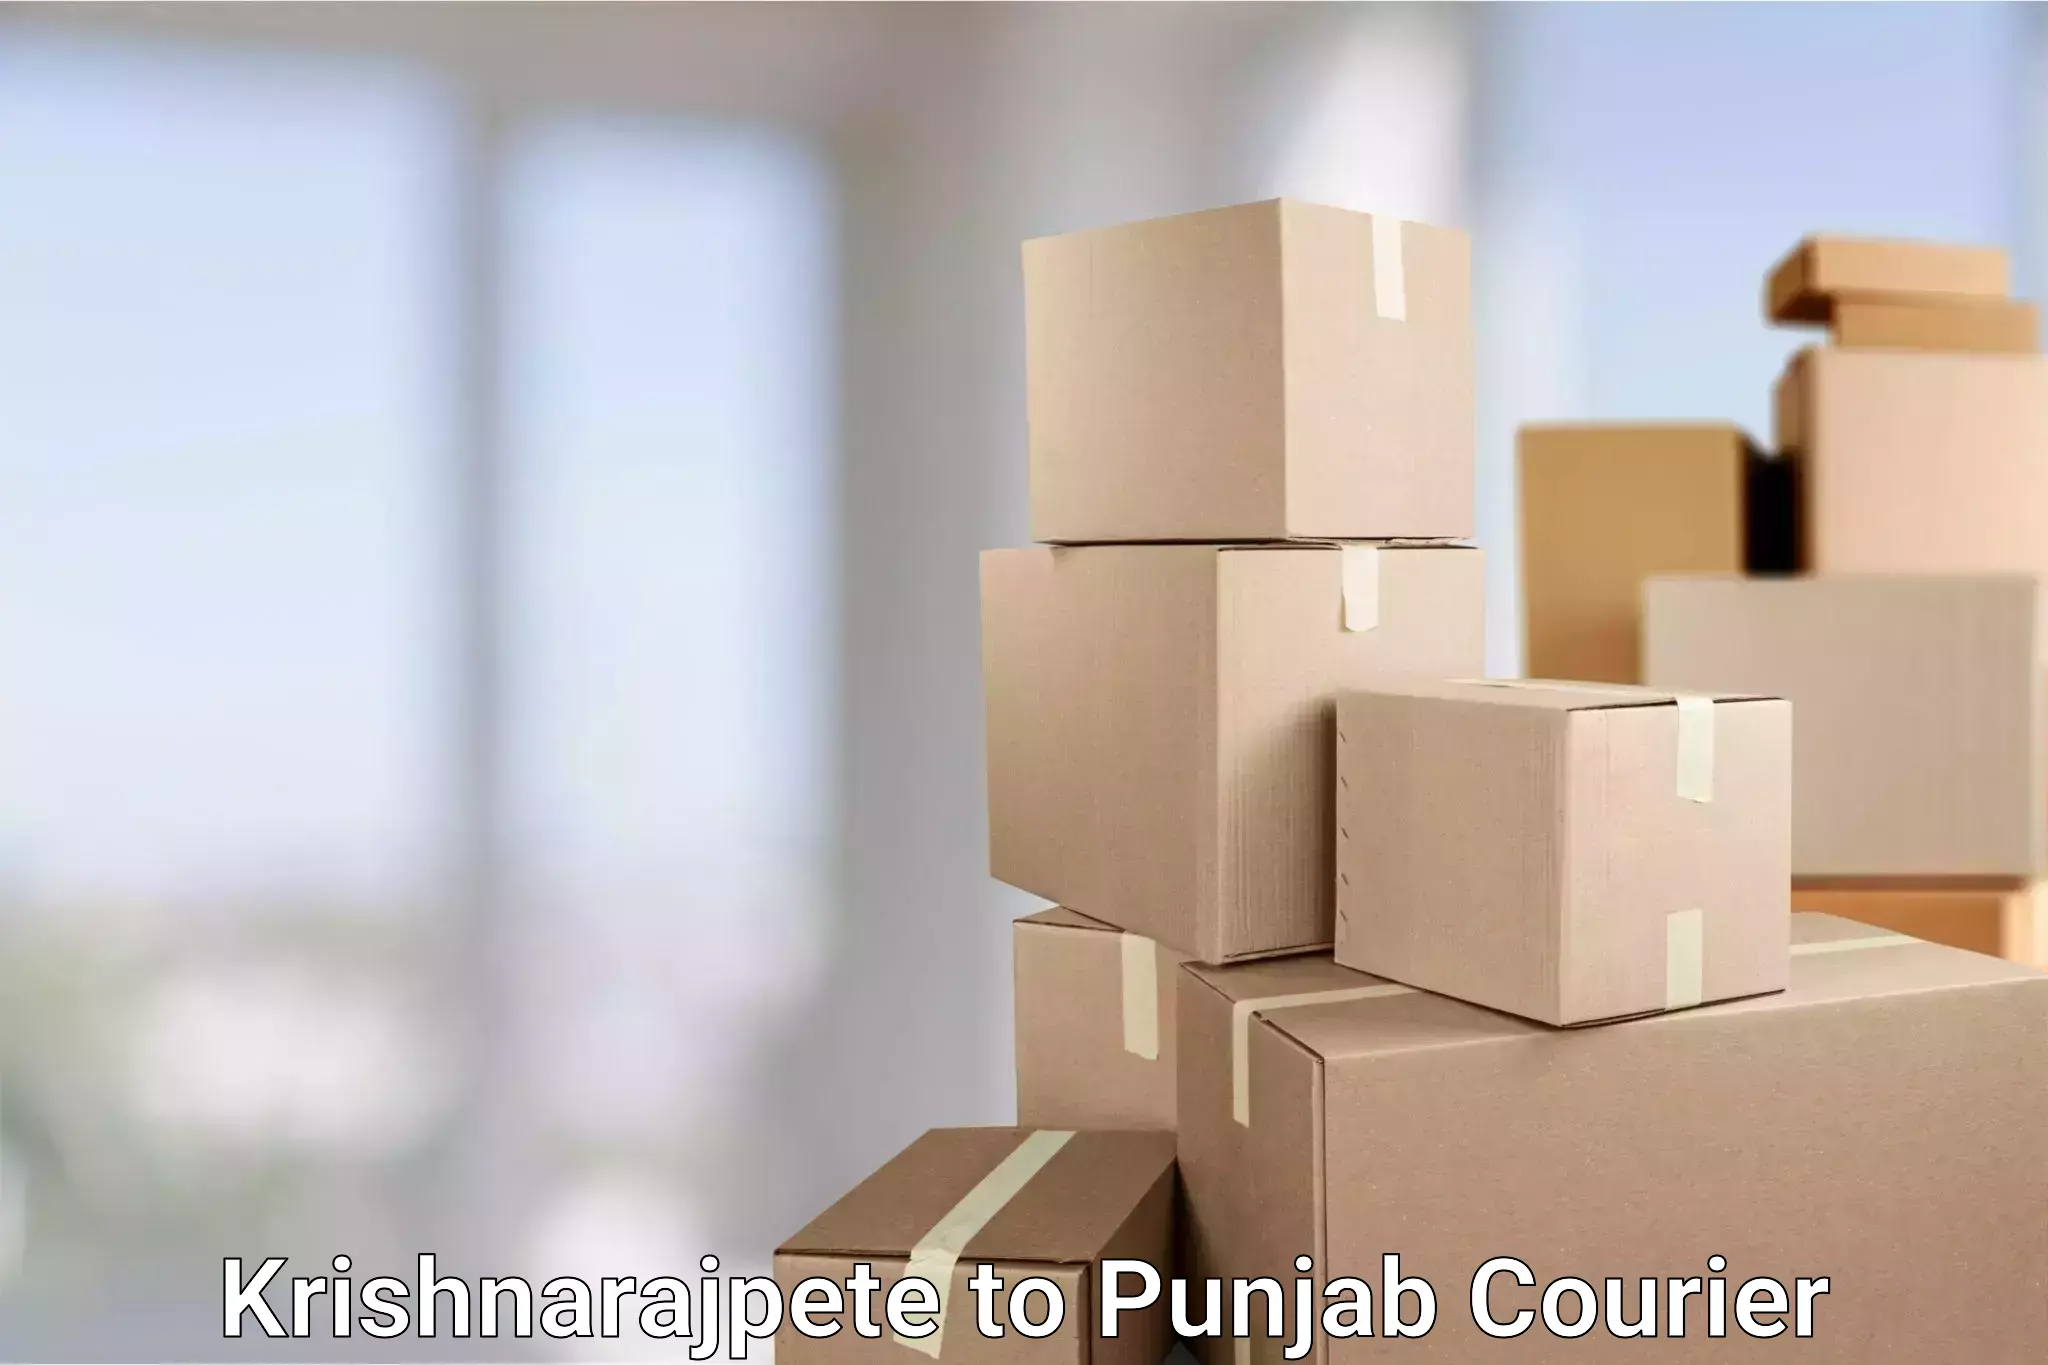 On-call courier service Krishnarajpete to Punjab